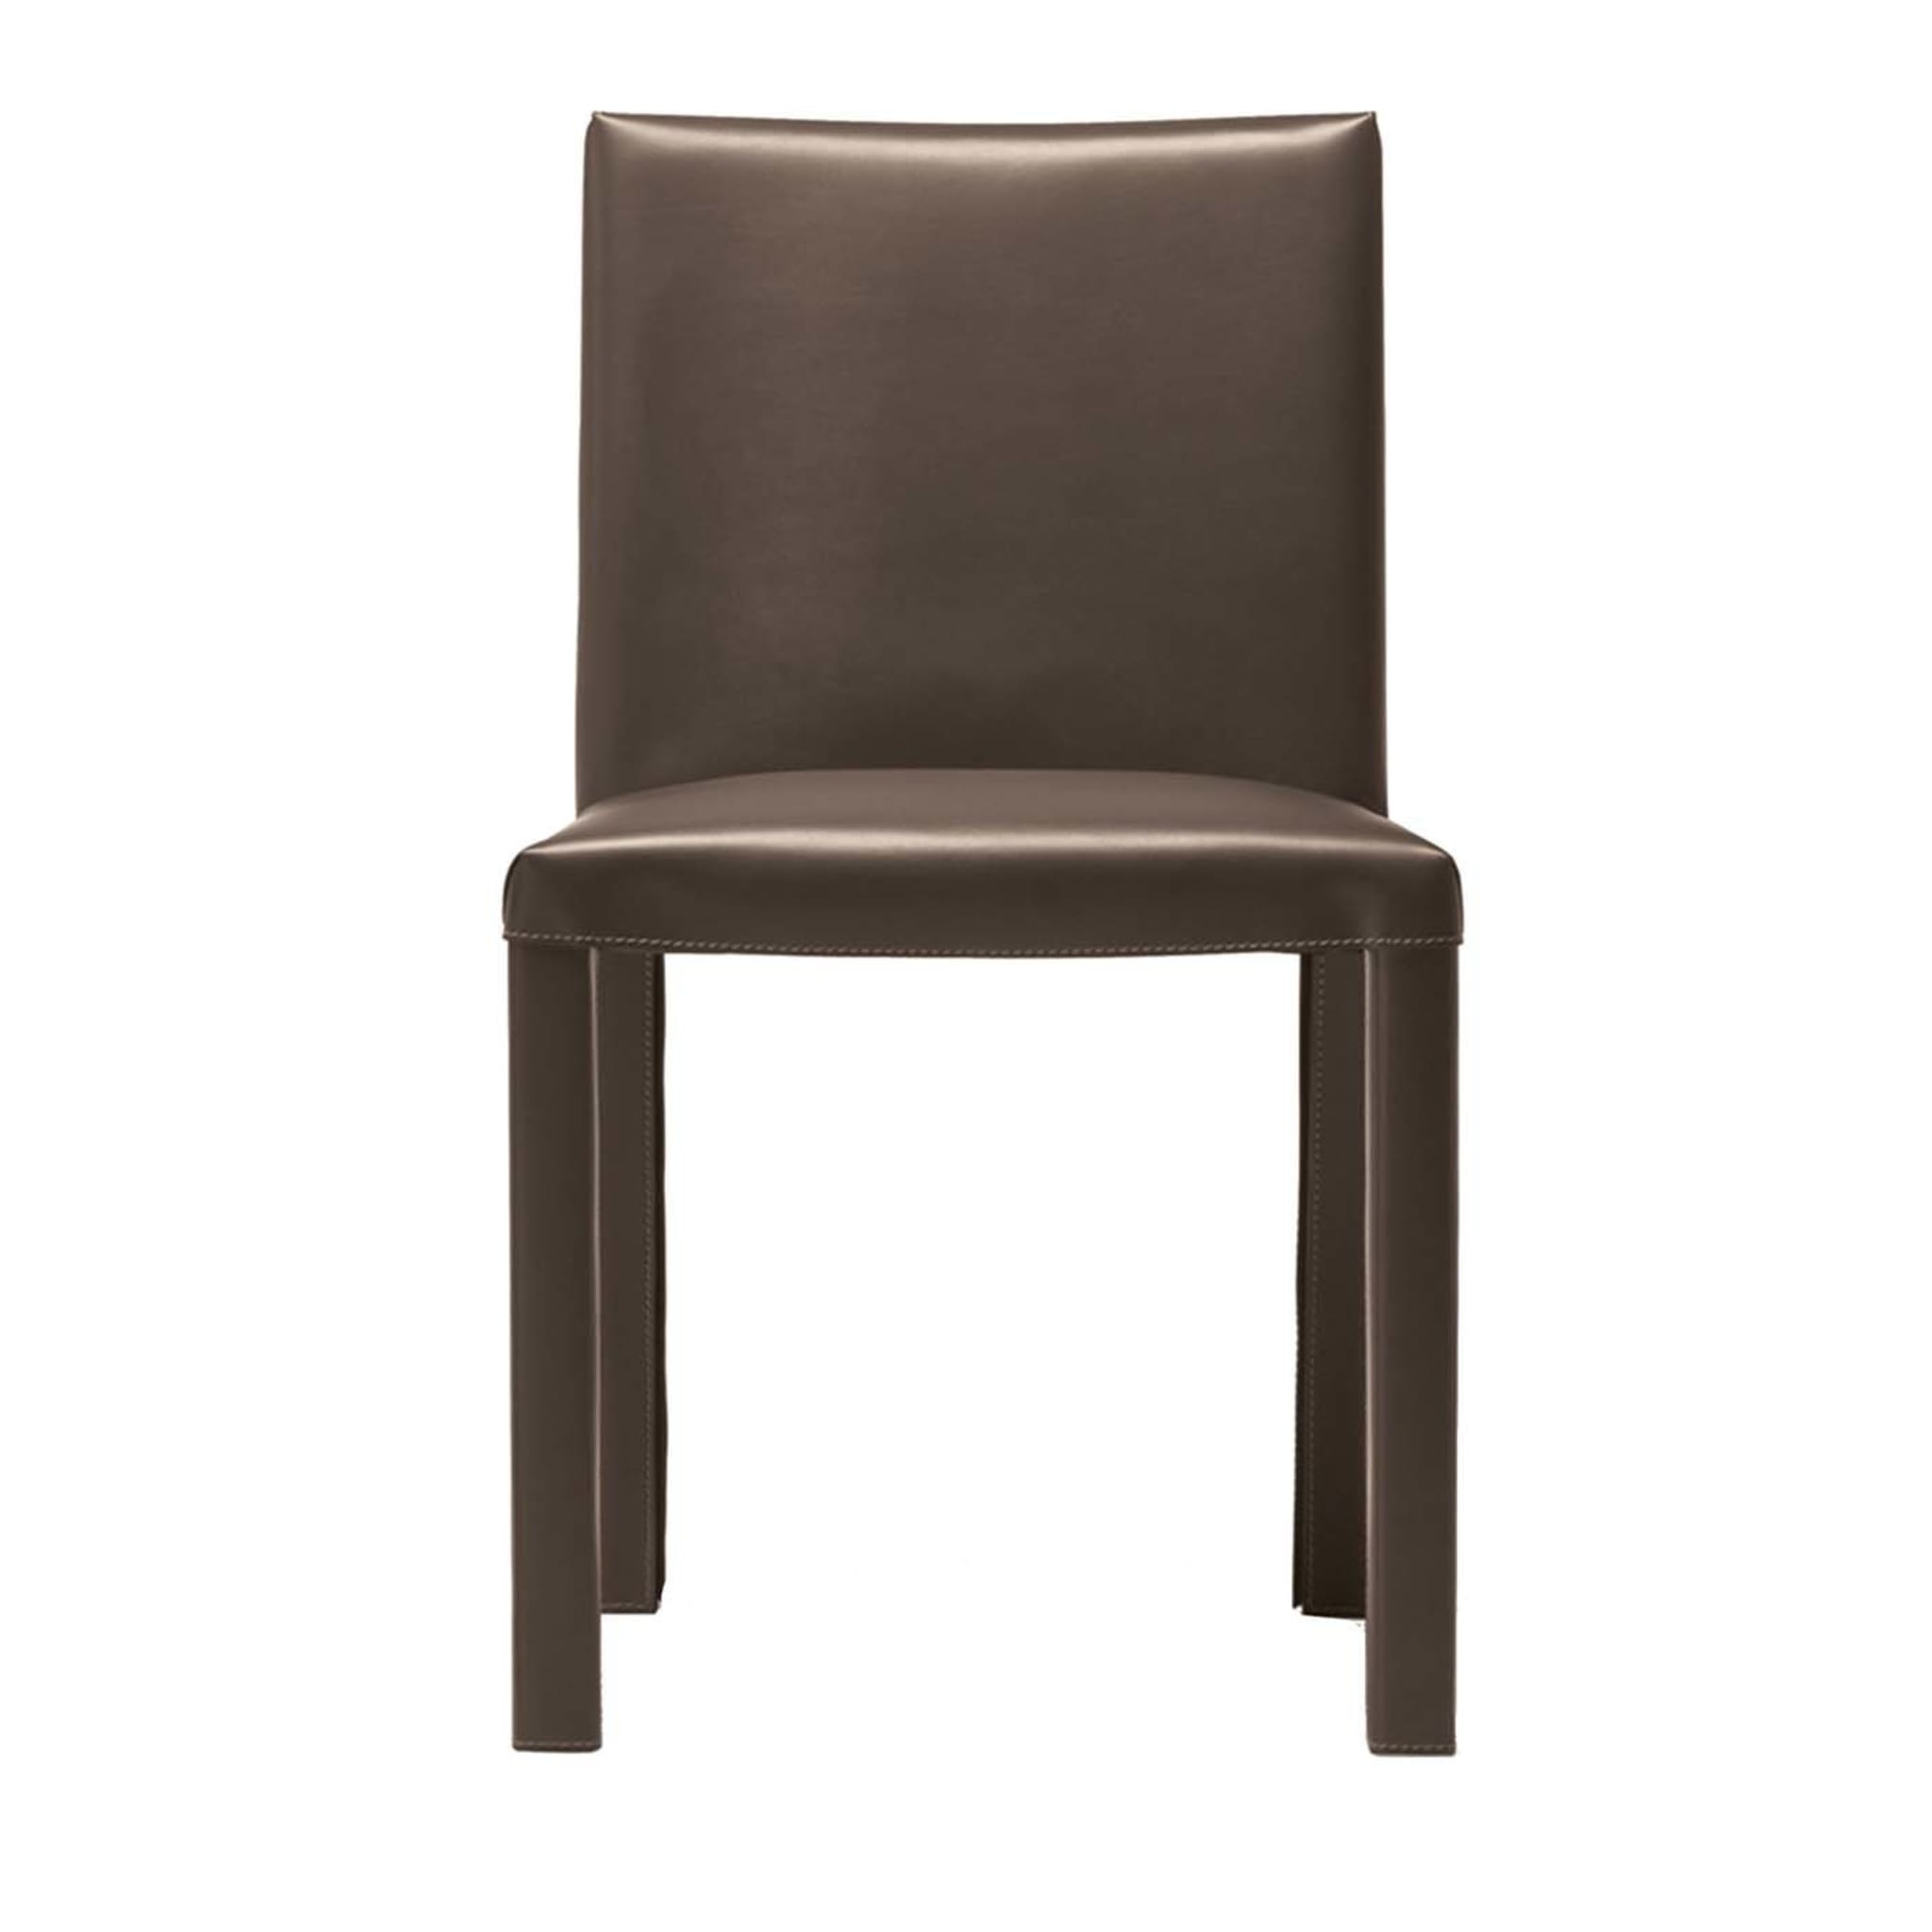 Trama Brown Leather Chair - Main view